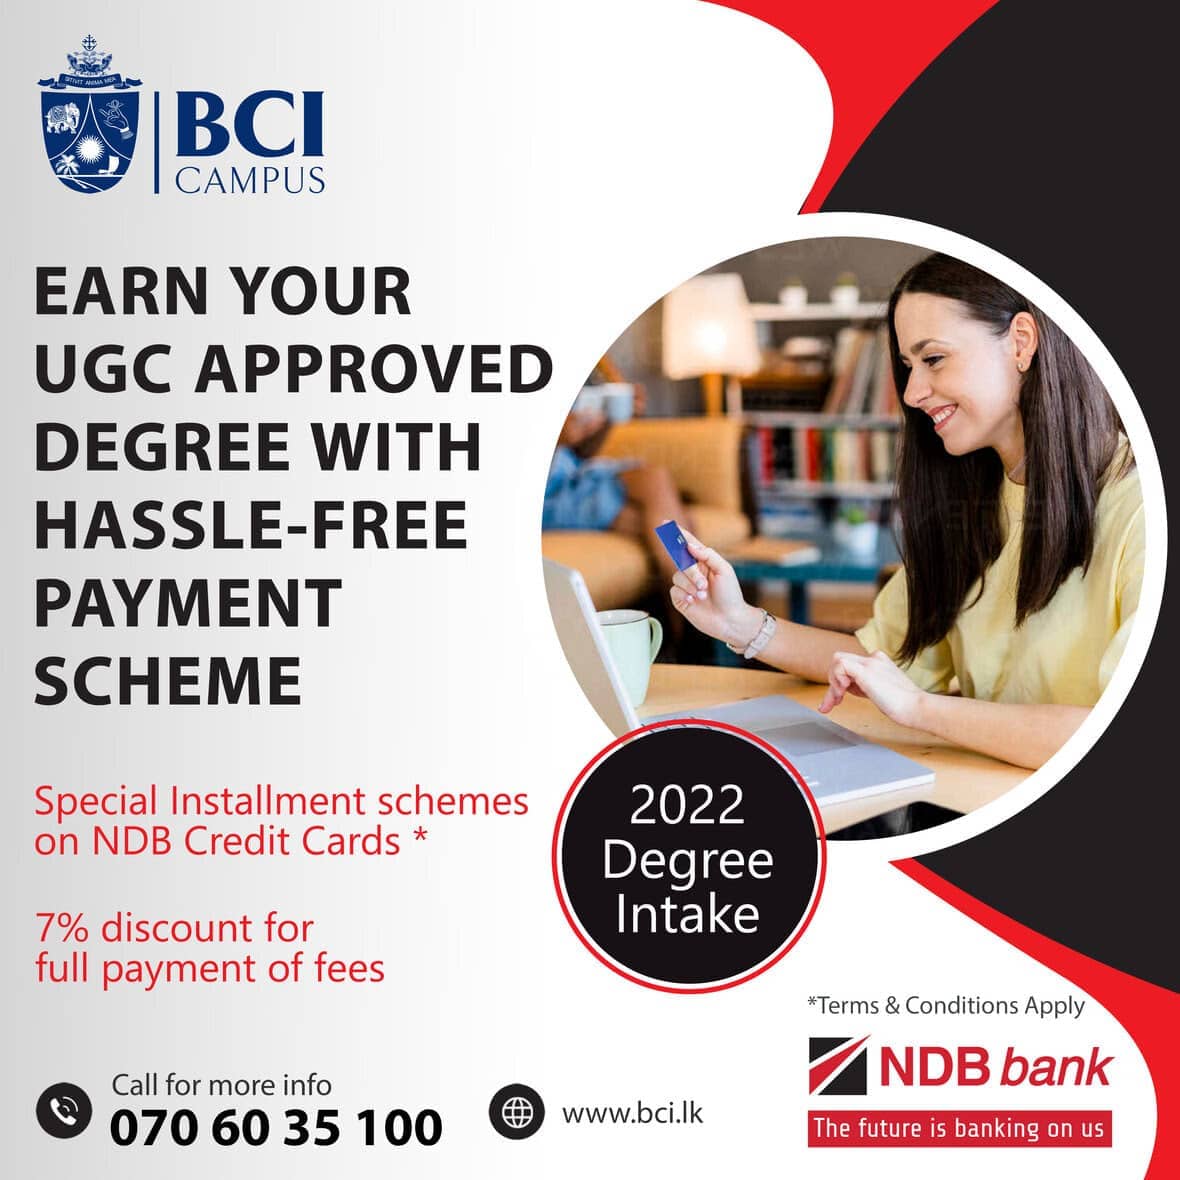 Earn your UGC approved degree with hassle-free payment scheme